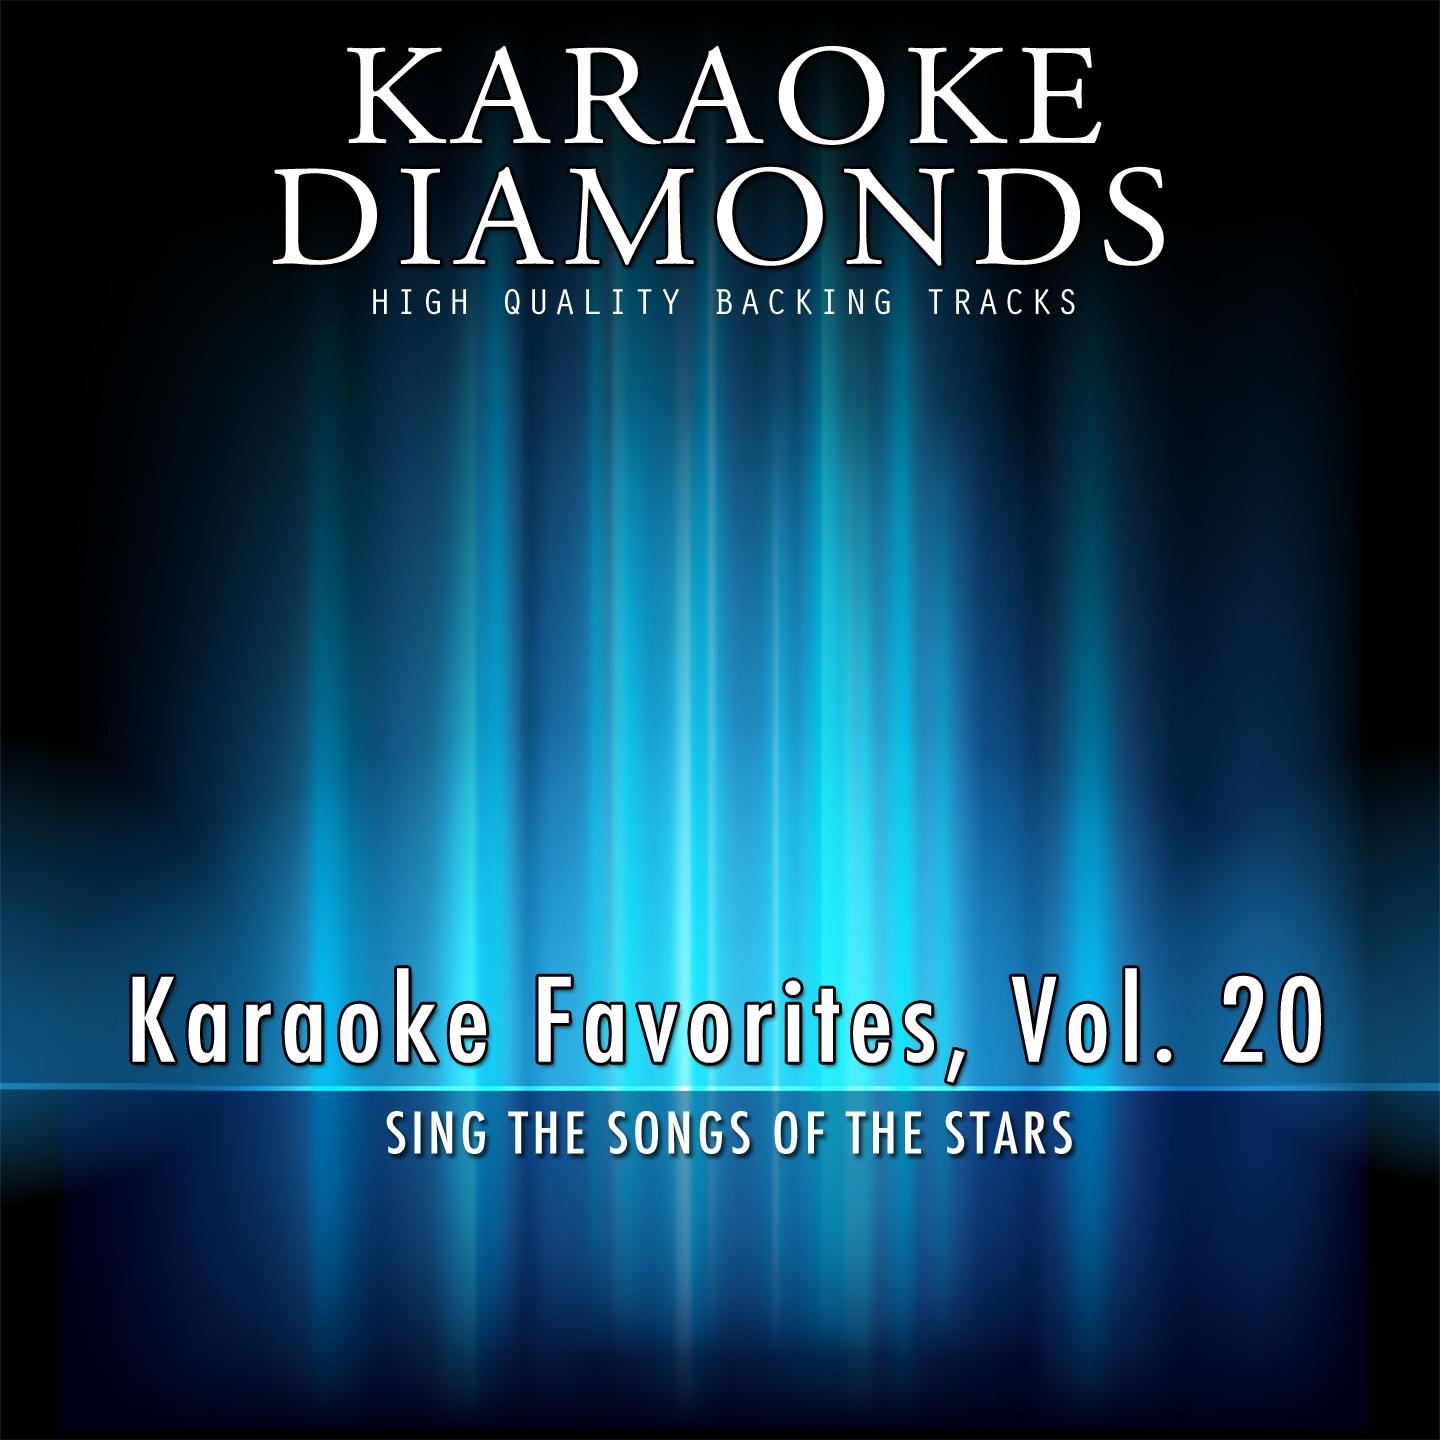 That's When I'll Stop Loving You (Karaoke Version) (Originally Performed By N Sync)